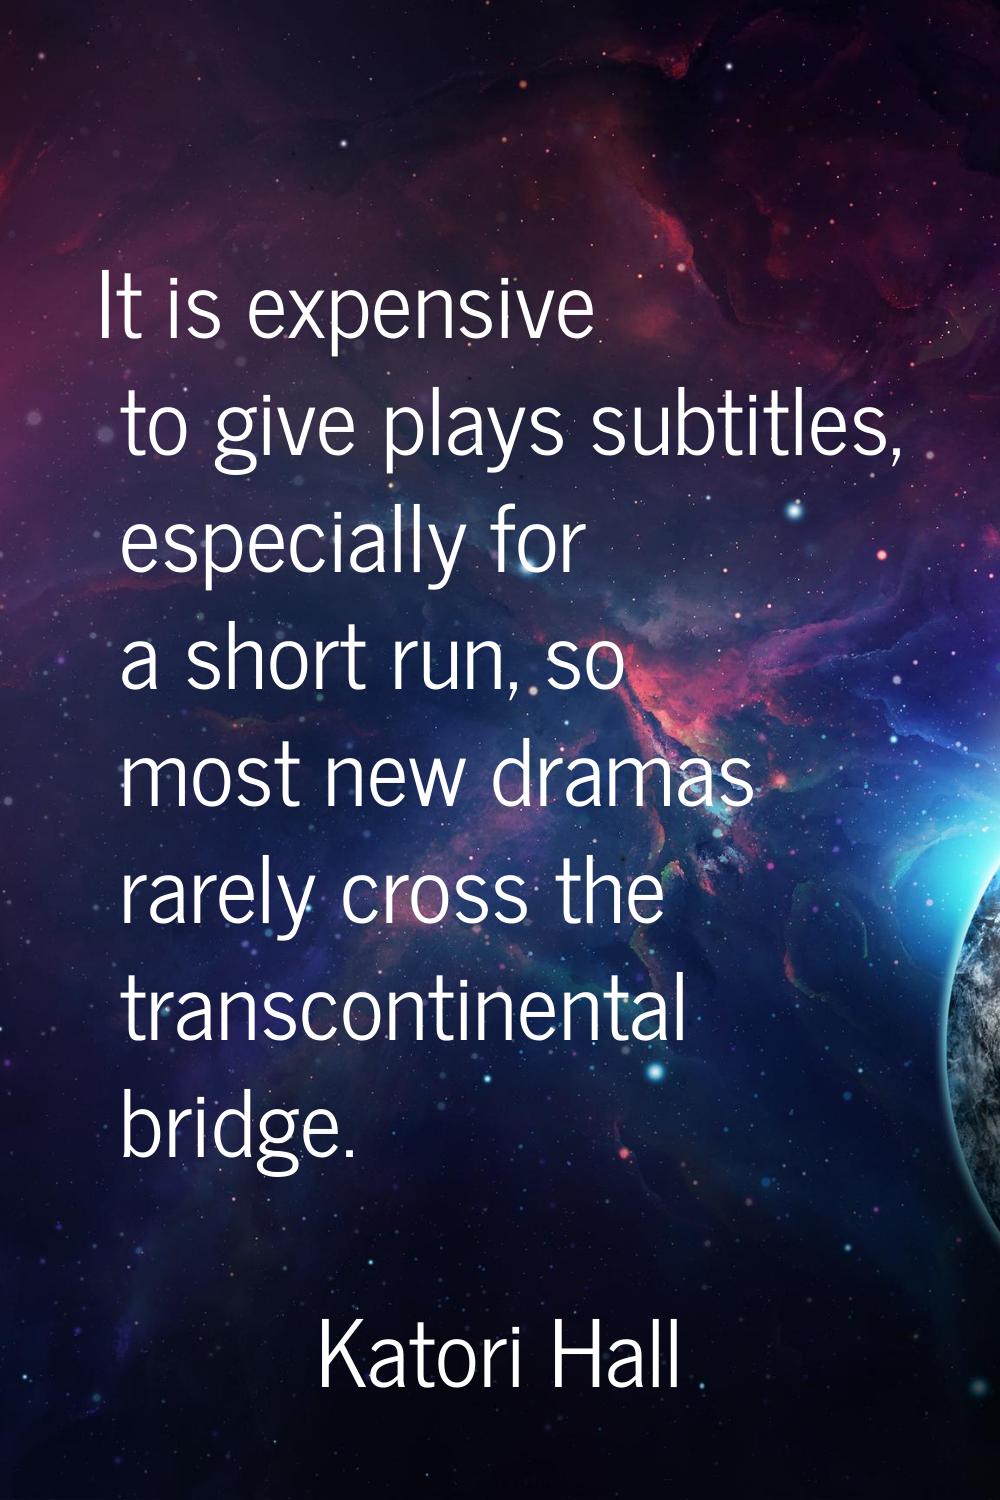 It is expensive to give plays subtitles, especially for a short run, so most new dramas rarely cros